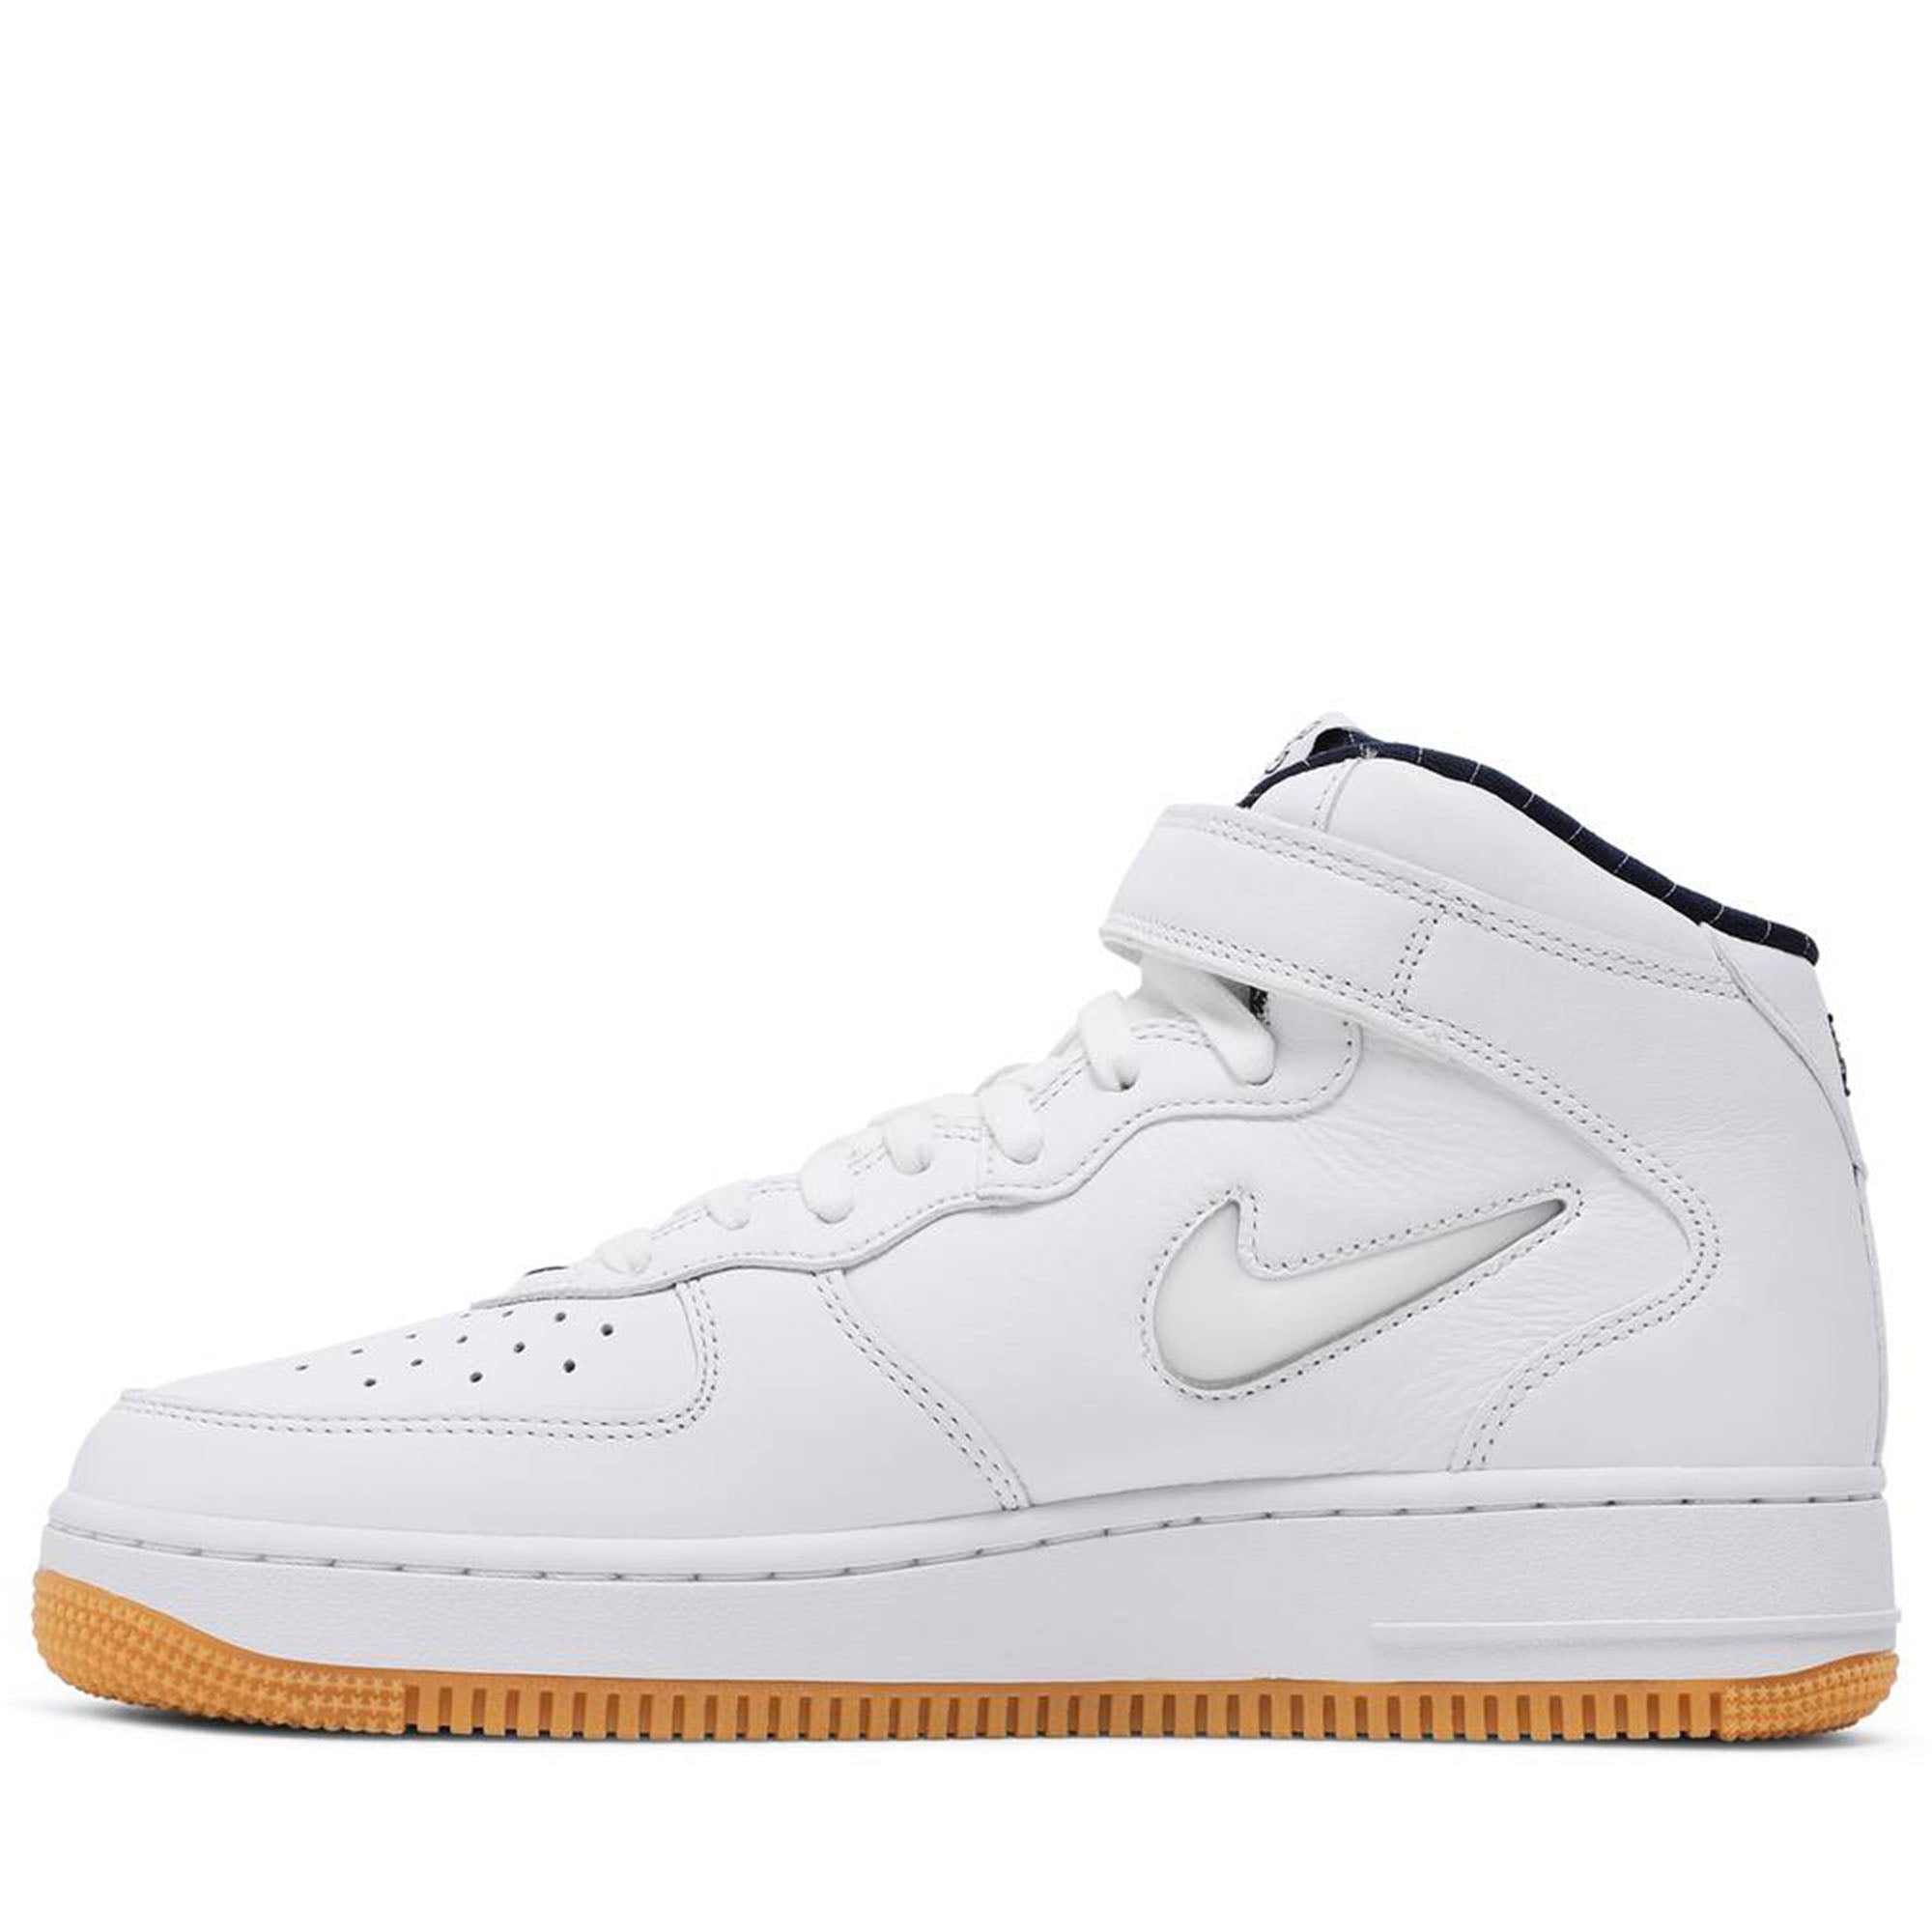 Nike Air Force 1 Mid QS Jewel NYC White Midnight Navy-PLUS